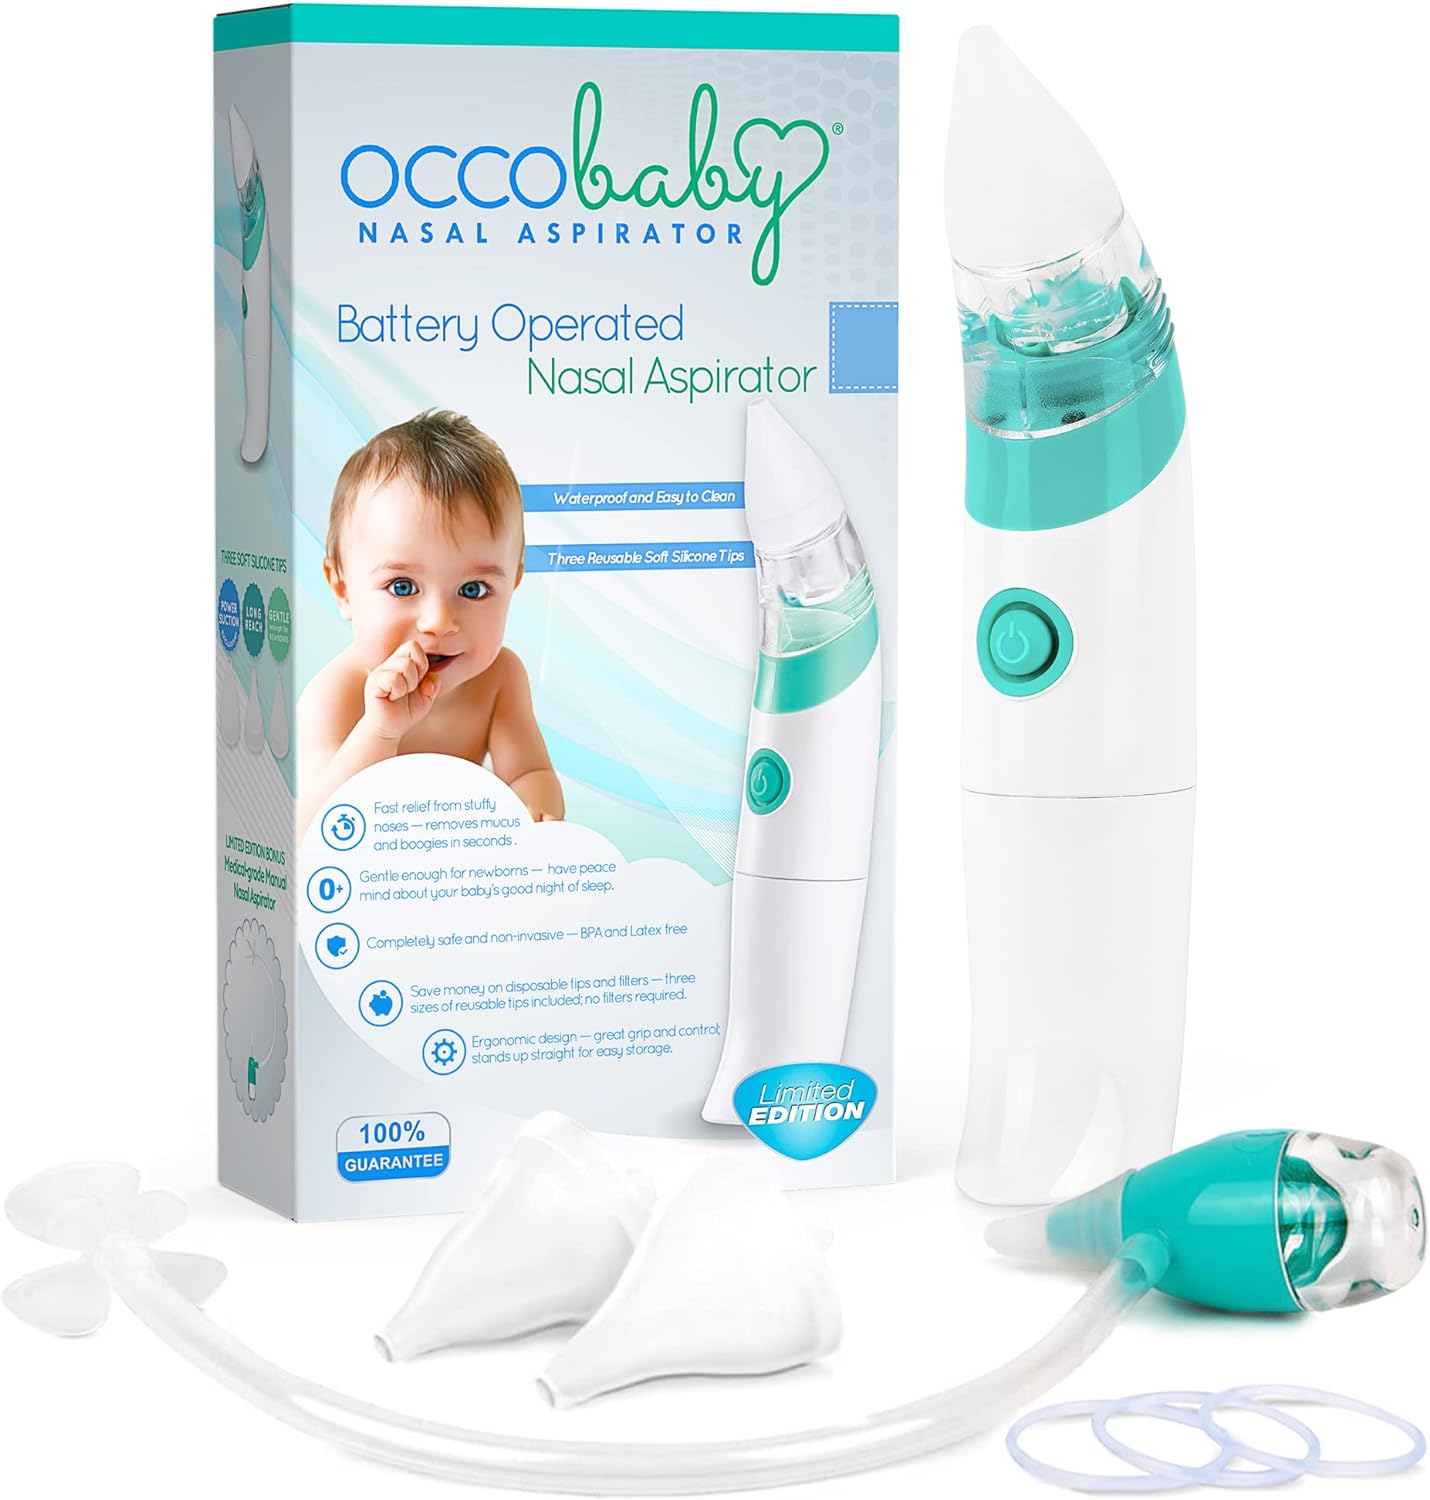 OCCObaby Baby Nasal Aspirator - 2 PK Baby Nose Suction Kit- Battery Operated Baby Nose Cleaner and Manual Baby Nose Sucker for Newborns, Infants and Toddlers - Congestion Relief for Babies